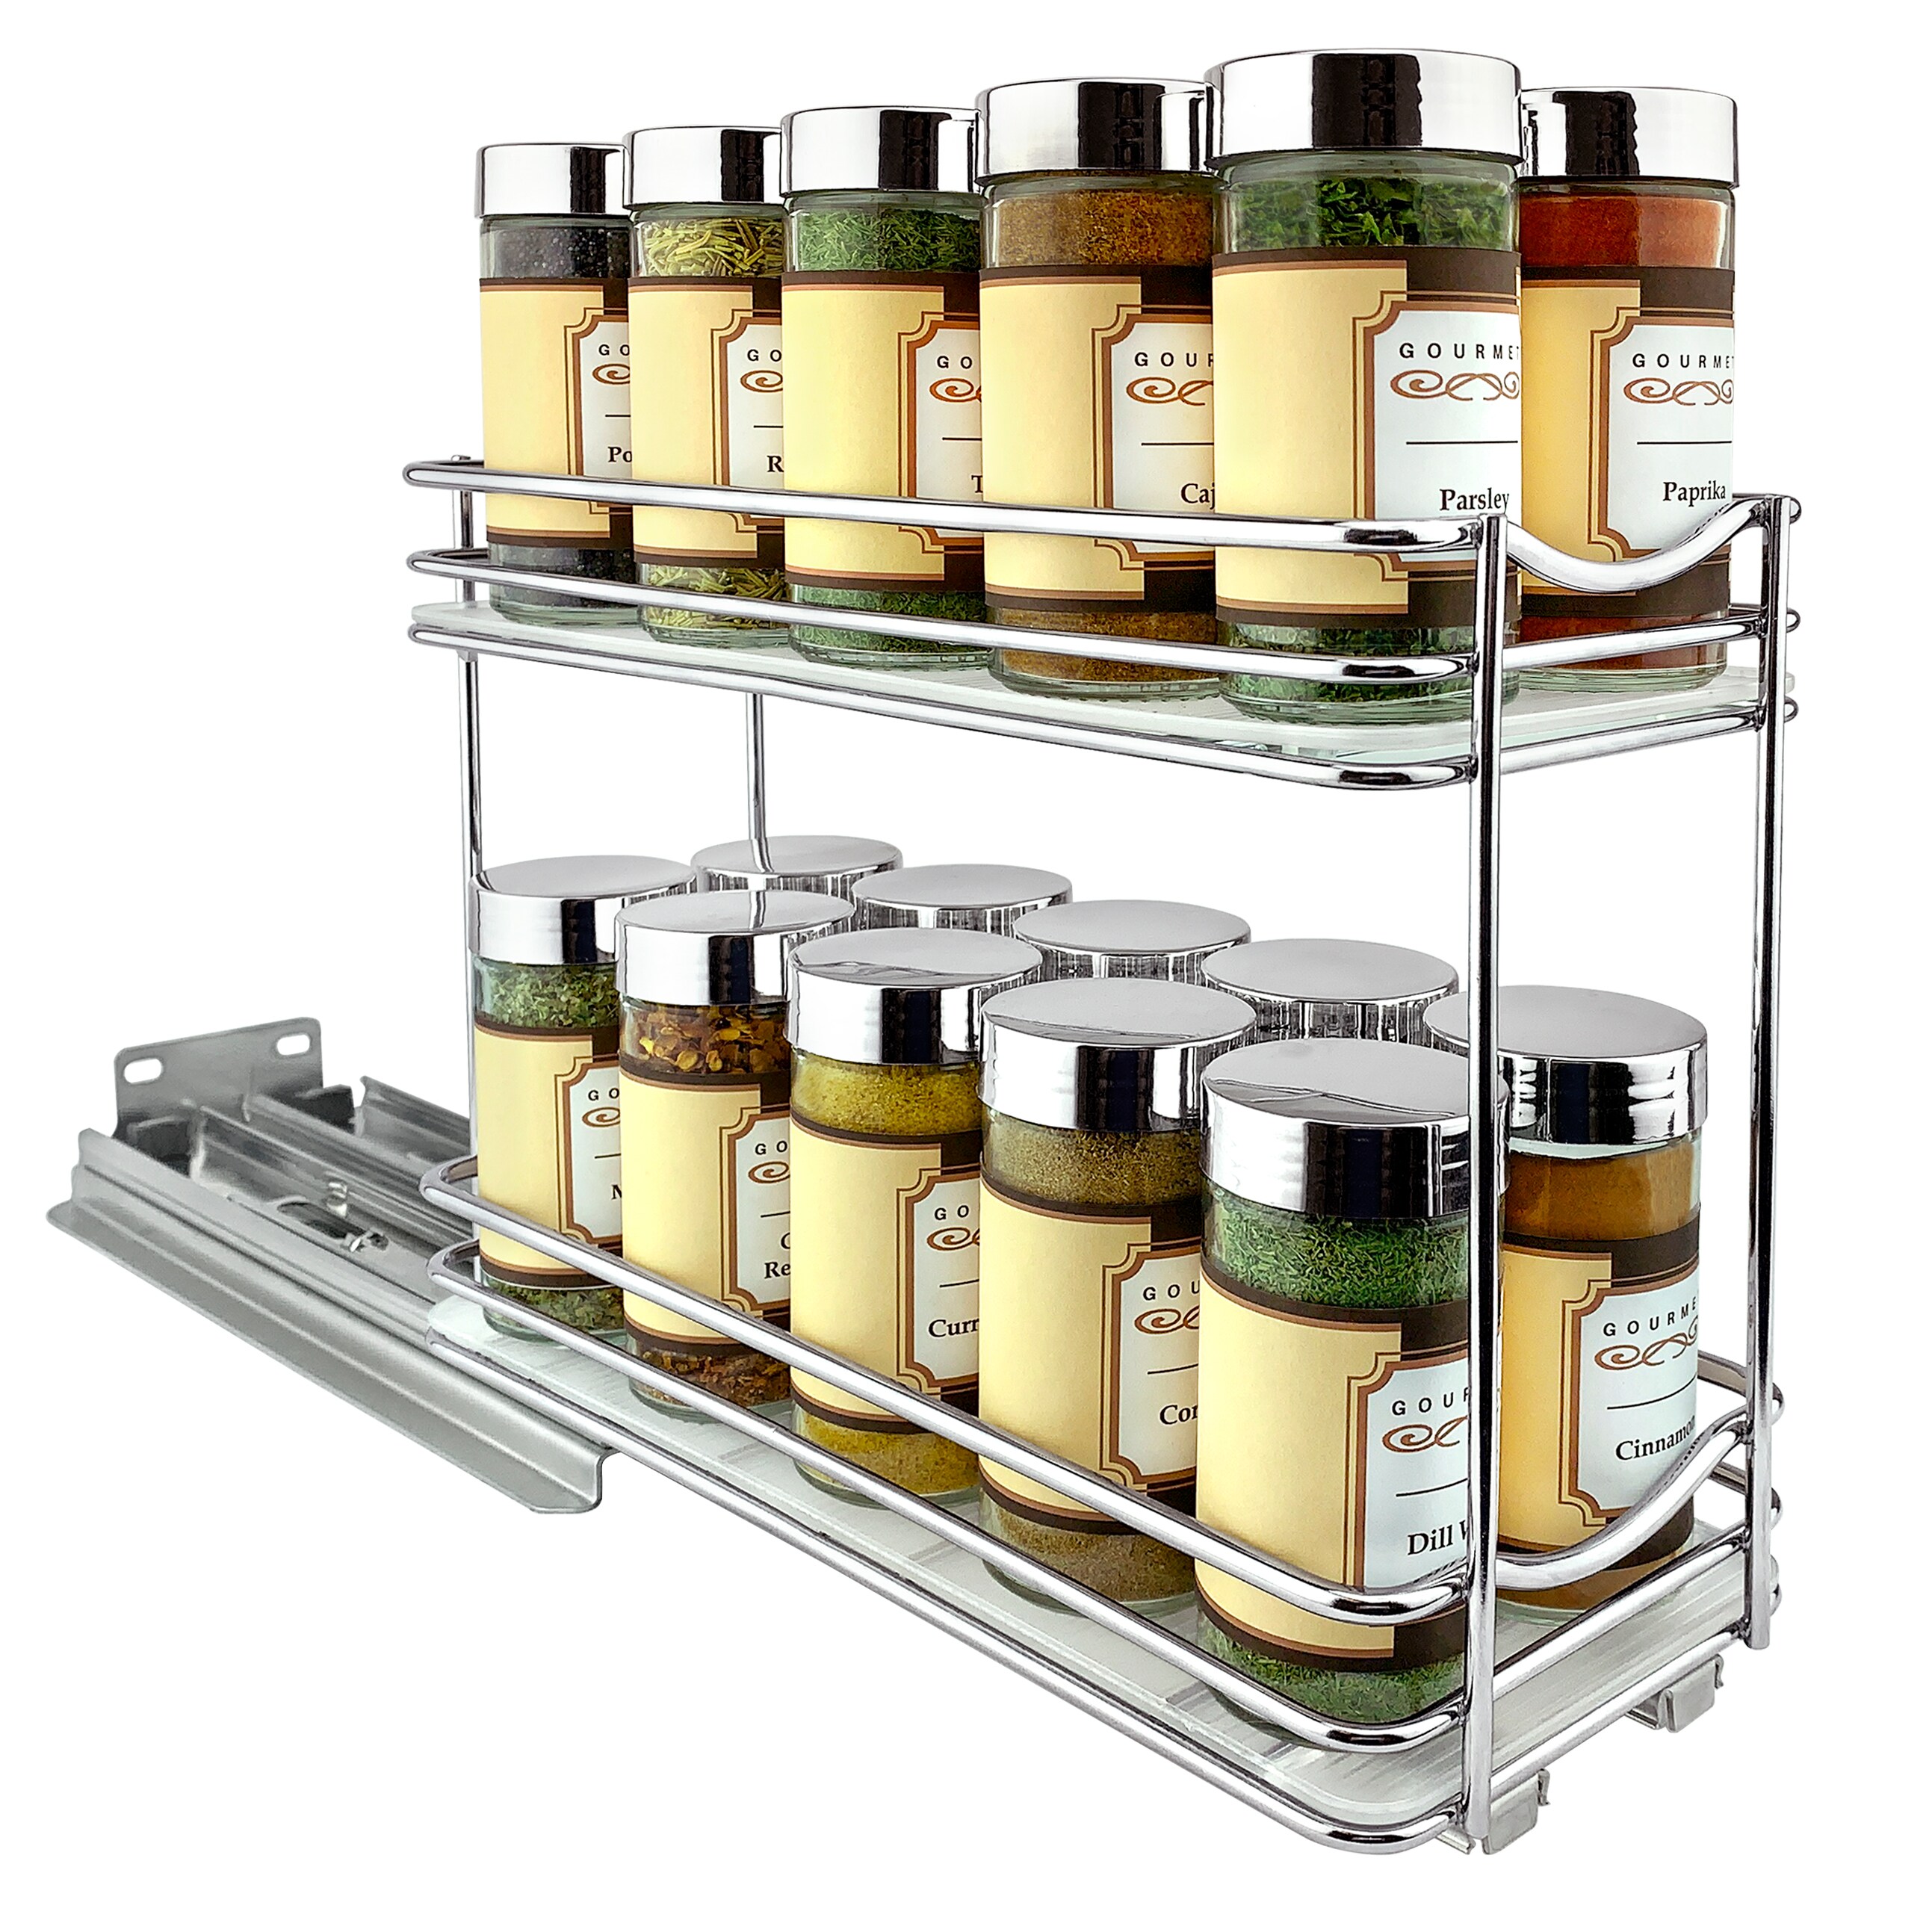 Lynk Professional Elite Pull Out Spice Rack Organizer for Cabinet, 4-1/4 in. Wide, Wood-Chrome, Silver